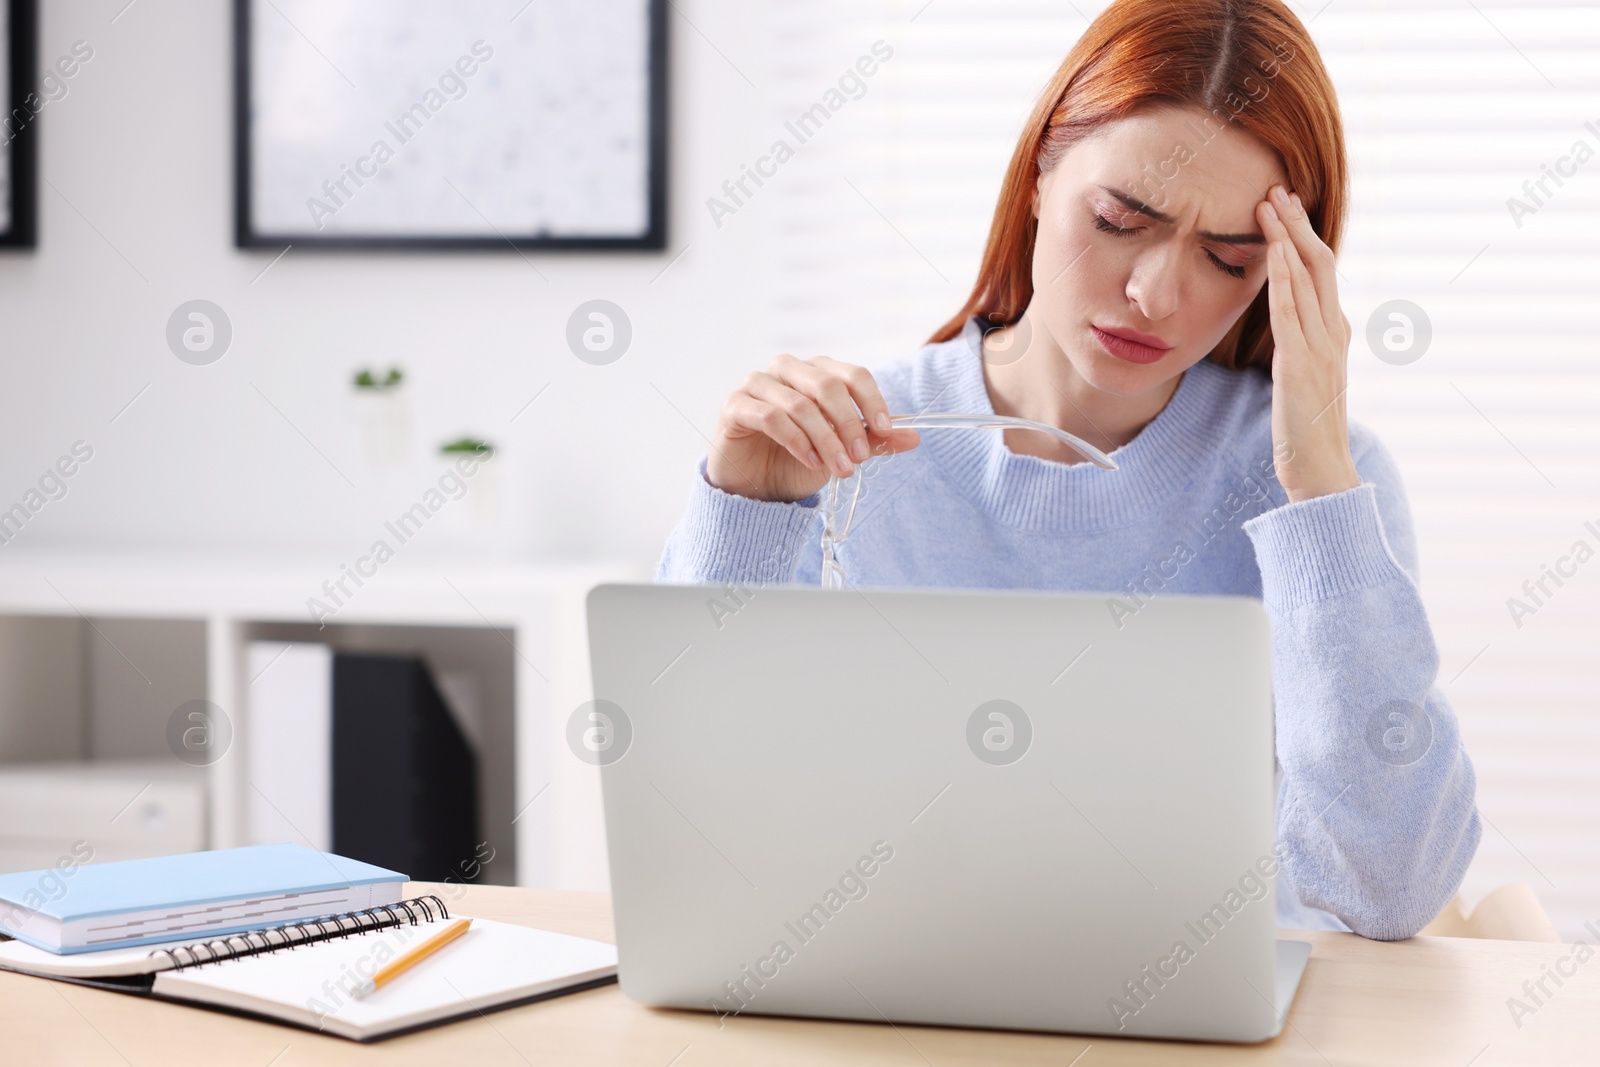 Photo of Woman with glasses suffering from headache at workplace in office, space for text